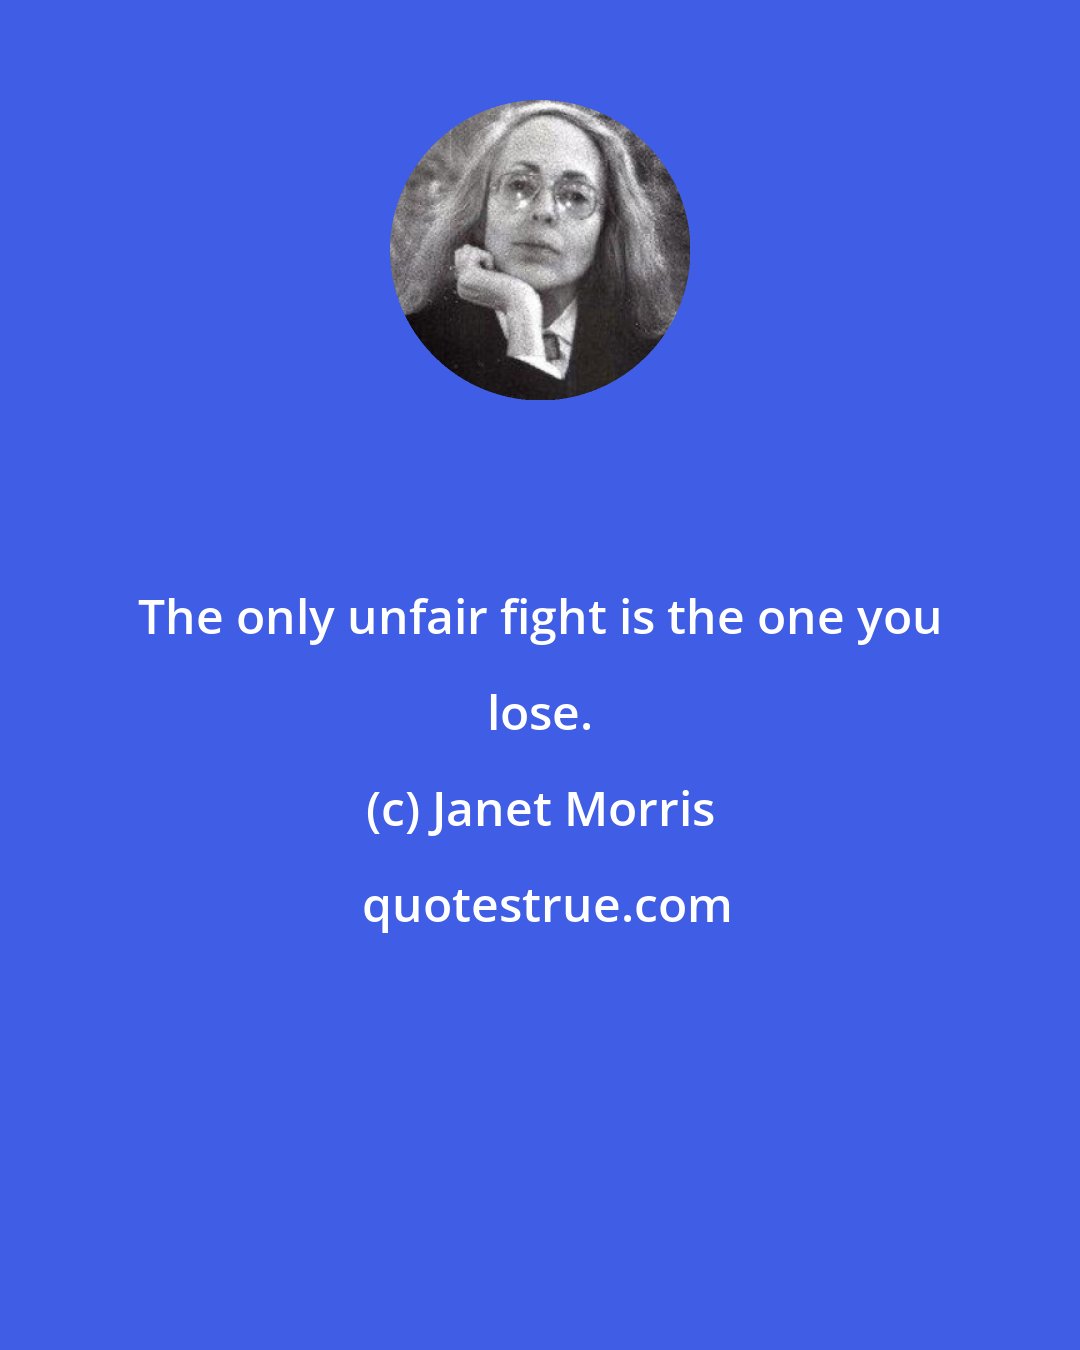 Janet Morris: The only unfair fight is the one you lose.